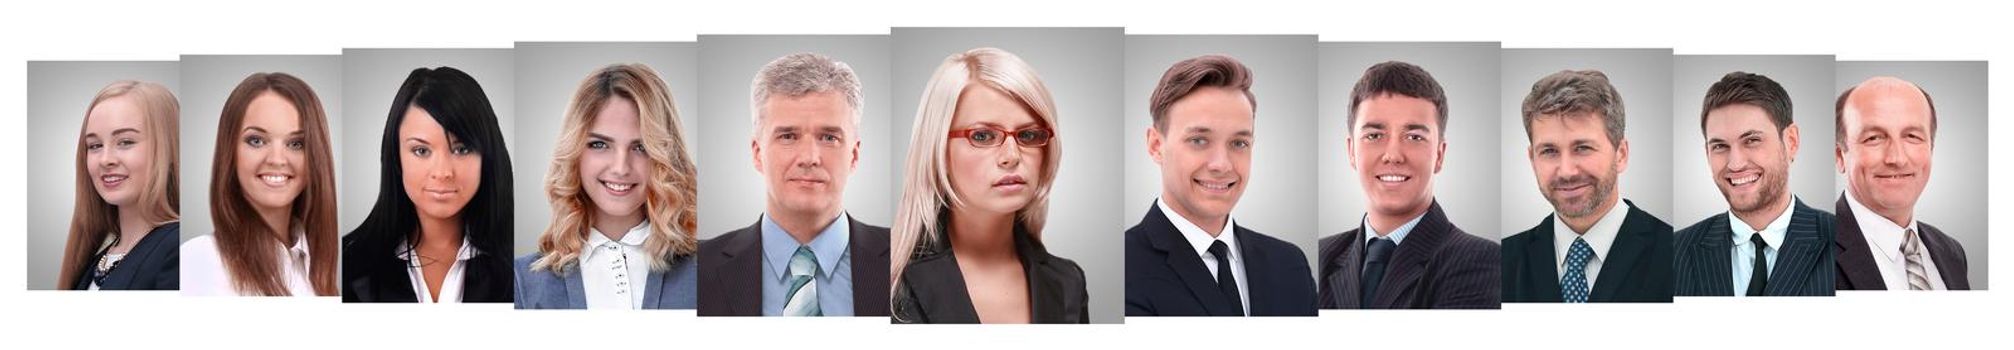 panoramic collage of portraits of successful business people. business concept